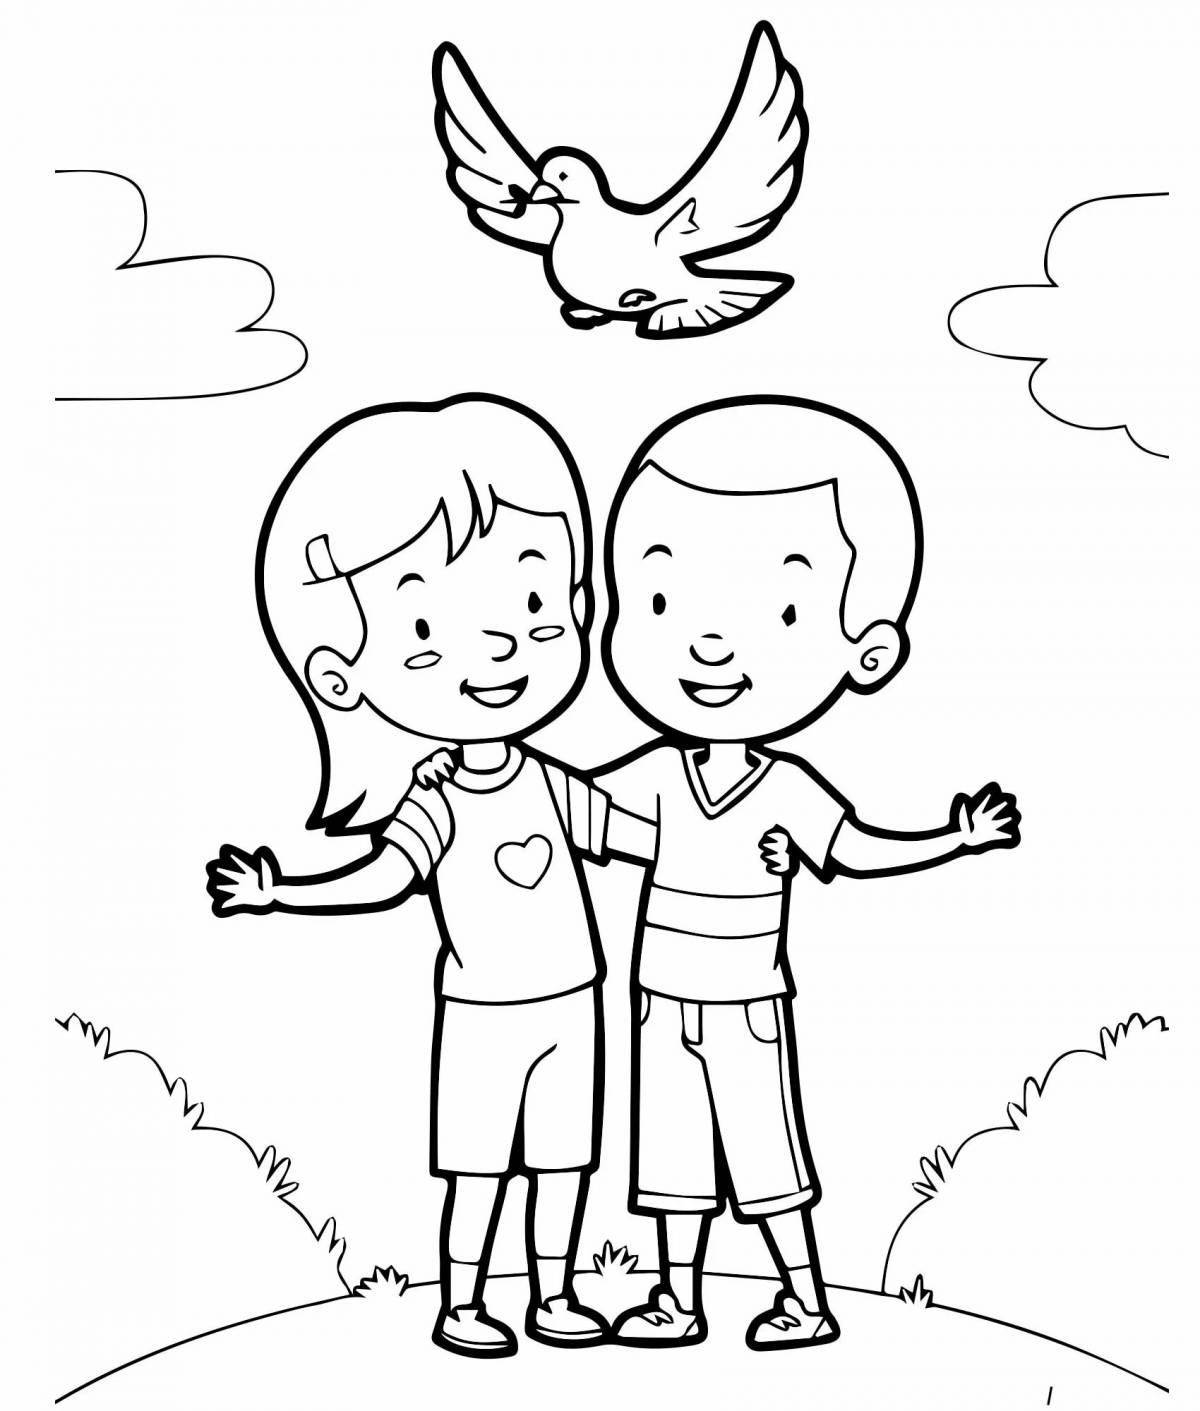 May there always be peace inspirational coloring page